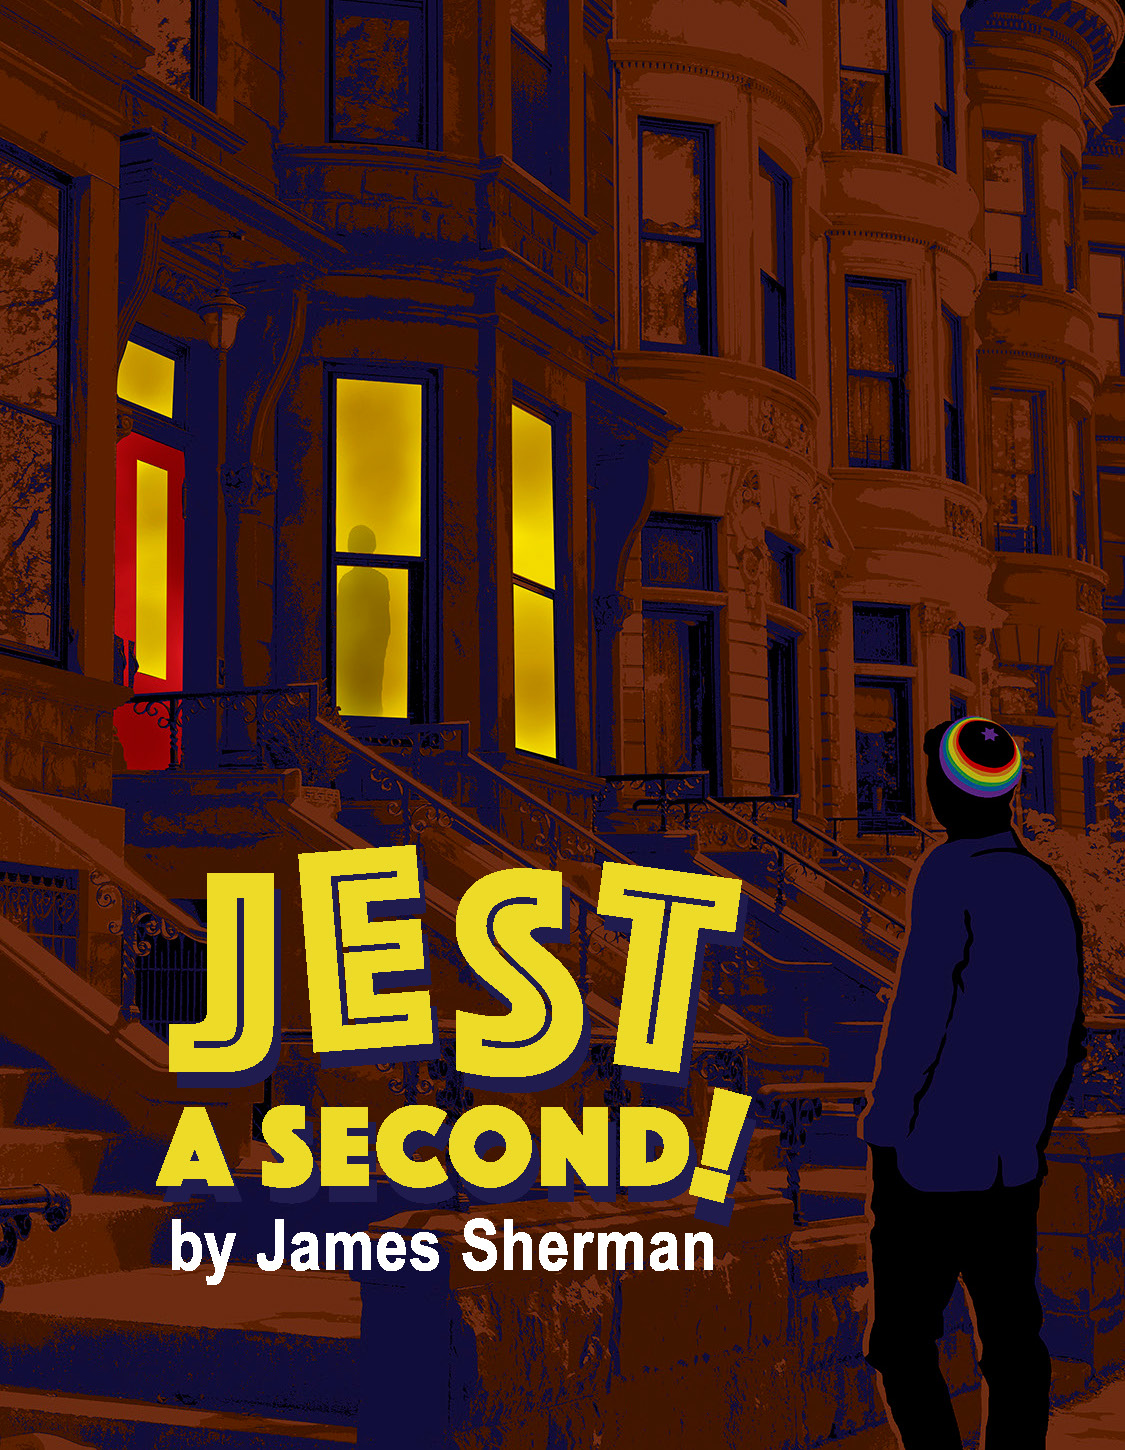 Rollicking farce, “Jest a Second!,” opens July 26